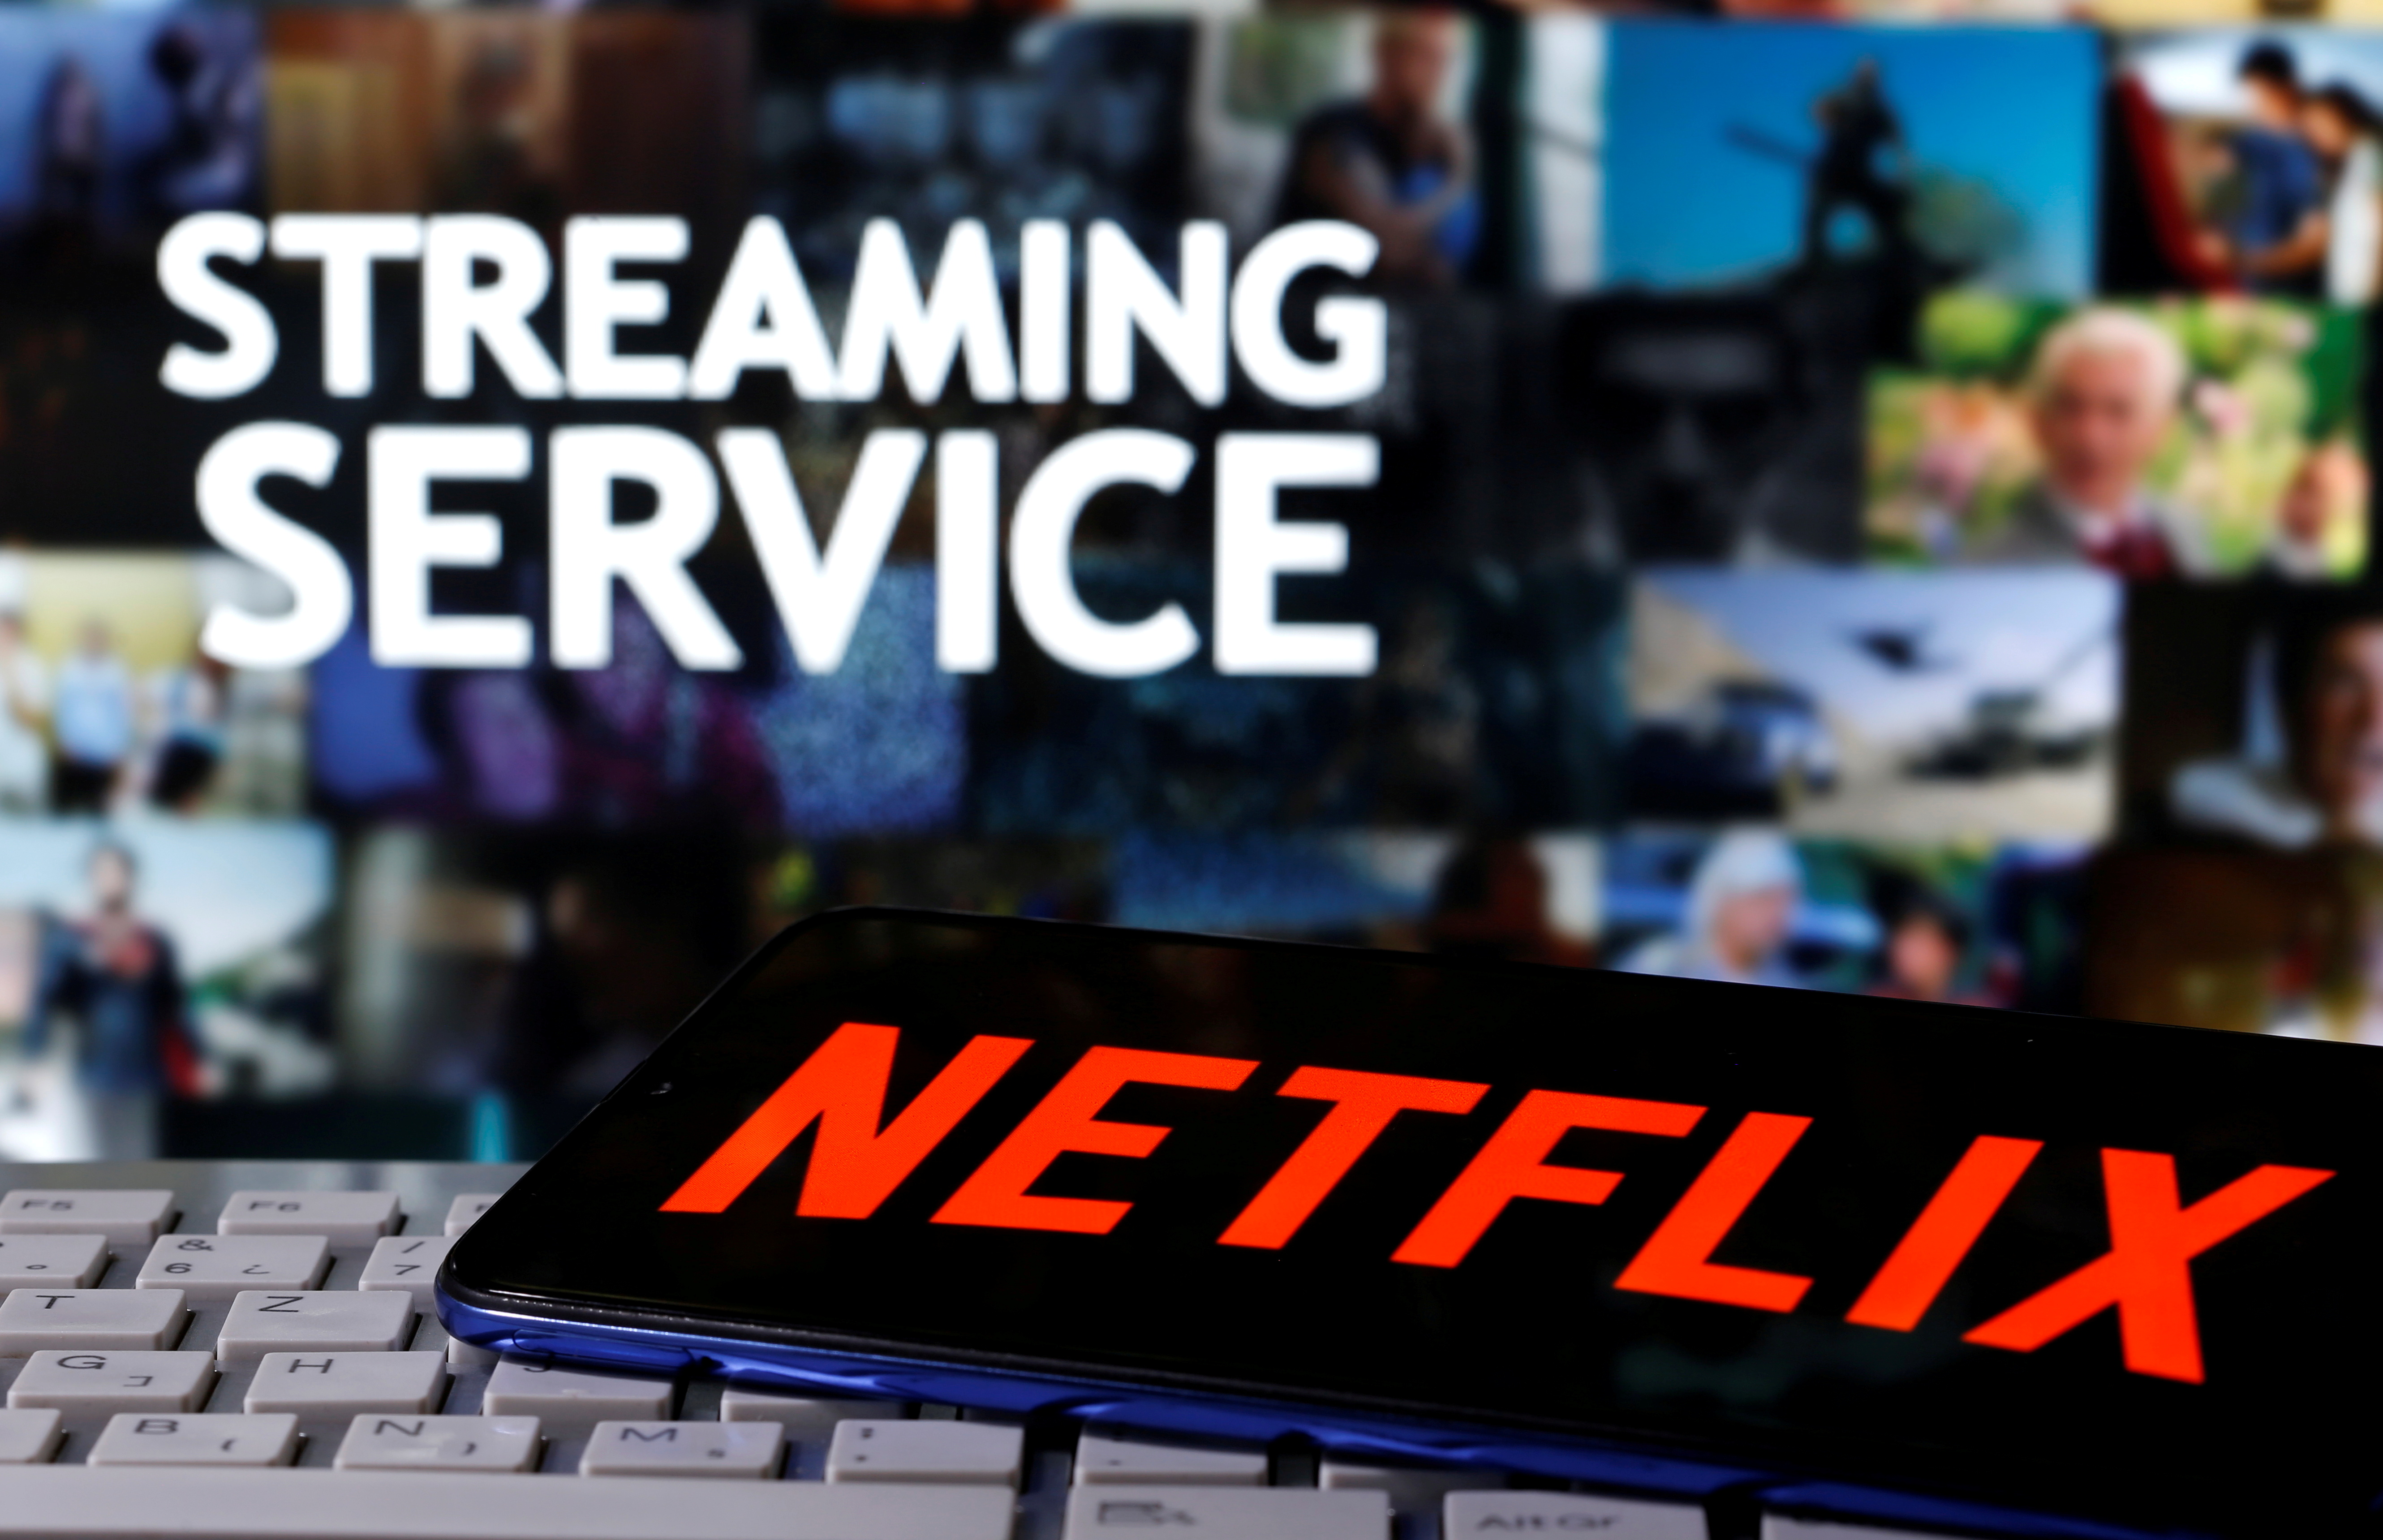 A smartphone with the Netflix logo is seen on a keyboard in front of displayed "Streaming service" words in this illustration